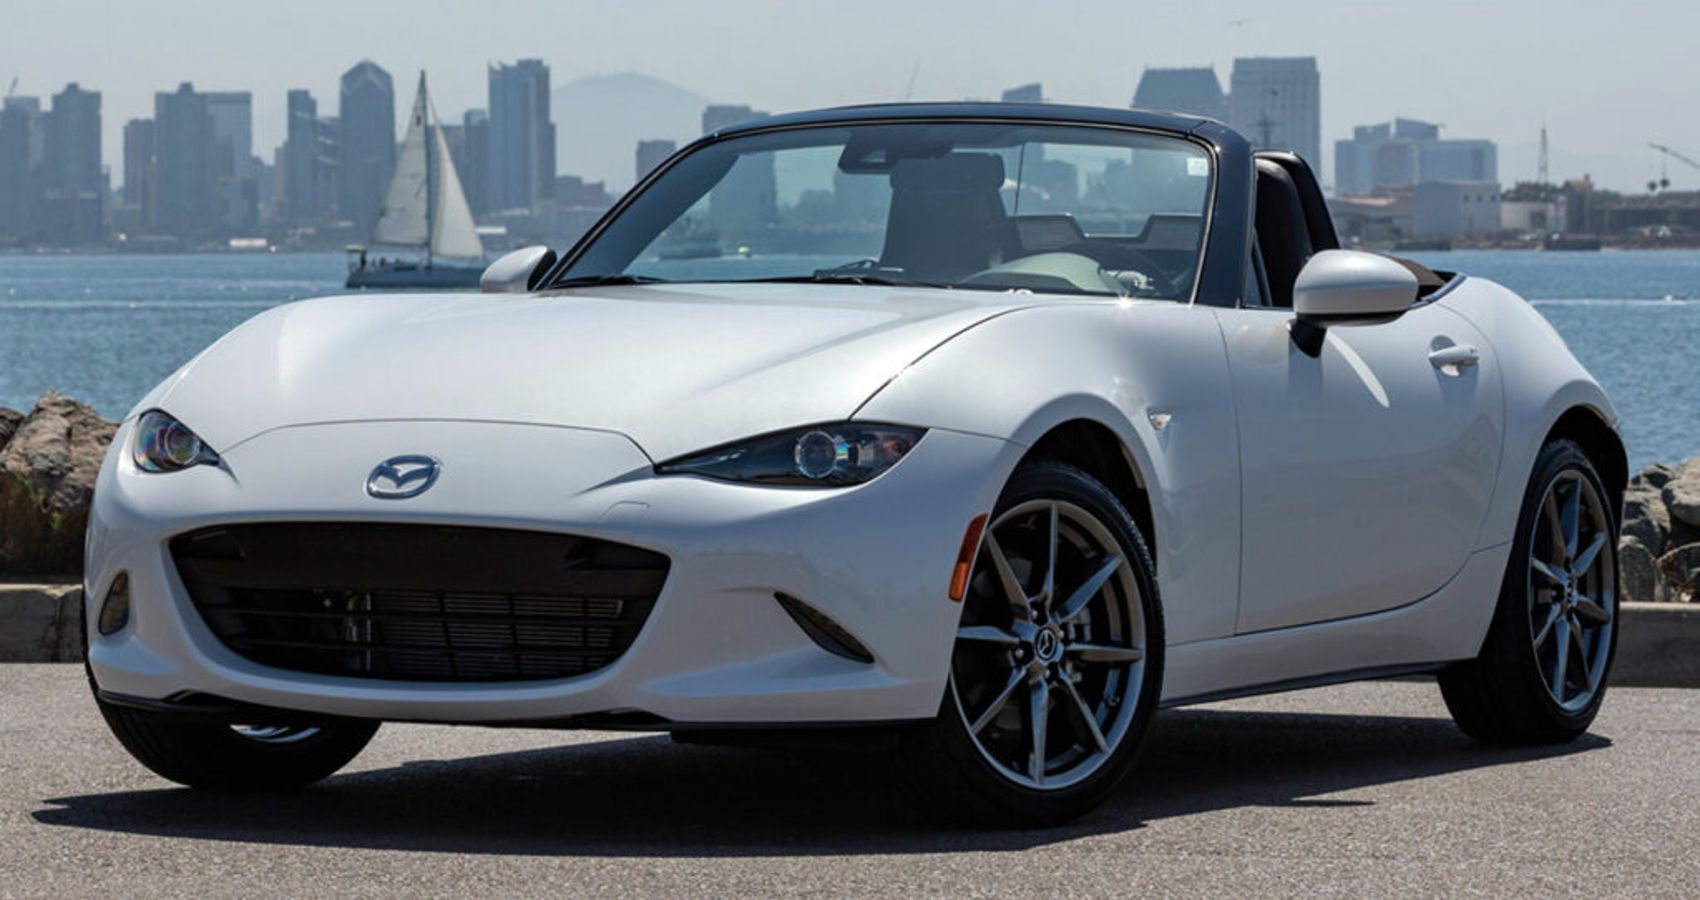 2023 Mazda MX-5 Miata-1 with water and the city skyline in the background